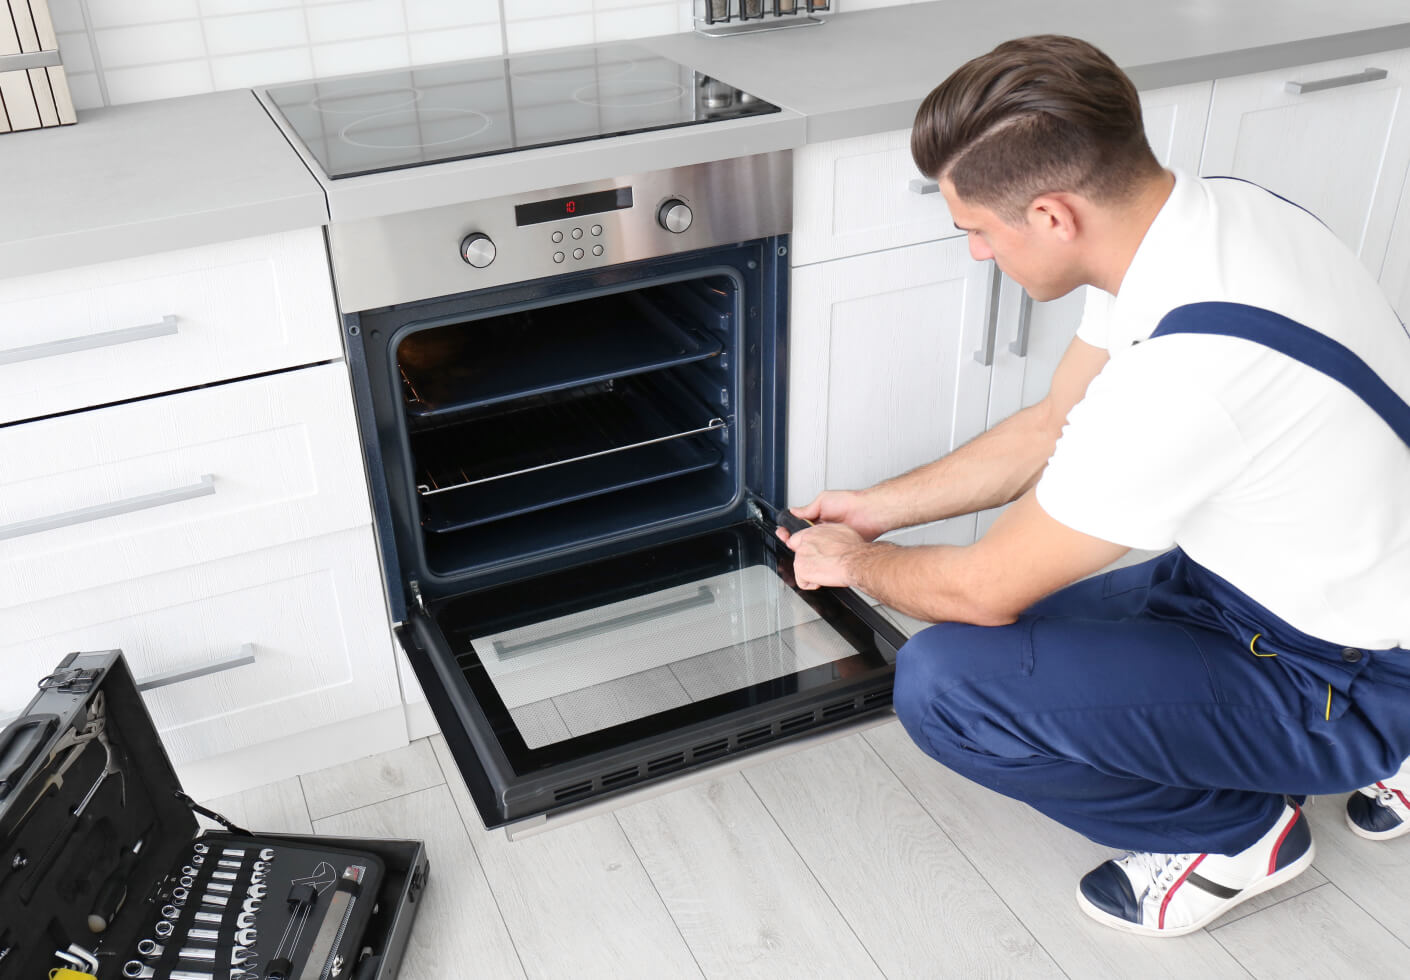 How To Fix The Error Code F7-E5 For Maytag Oven